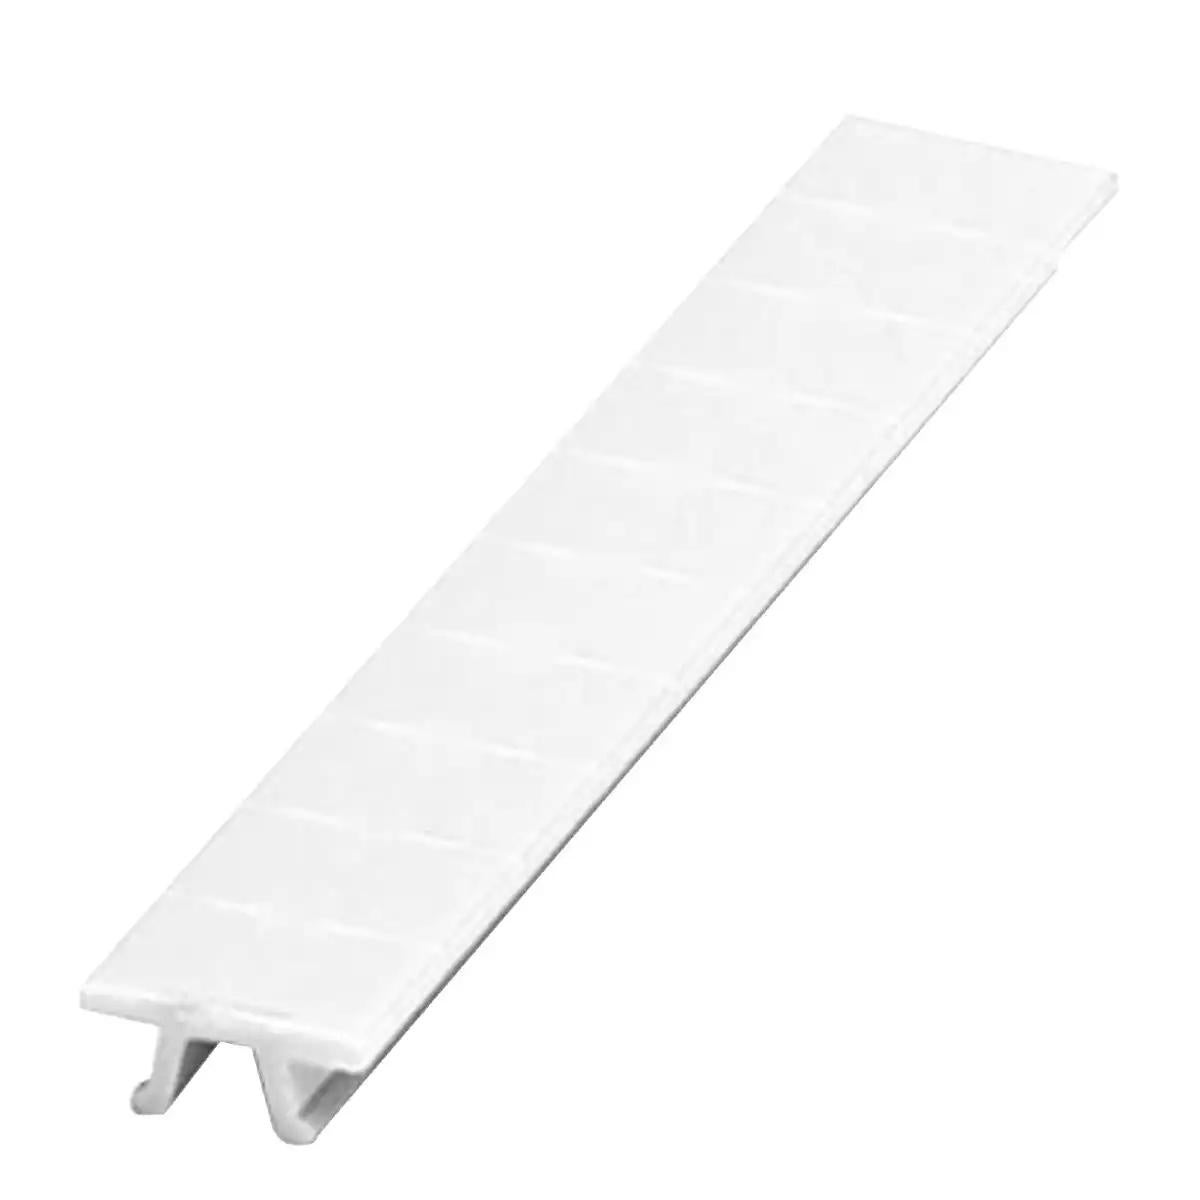 Schneider Electric Linergy TR Clip in marking strip, 6mm, 10 characters 1 to 10, printed horizontally, white